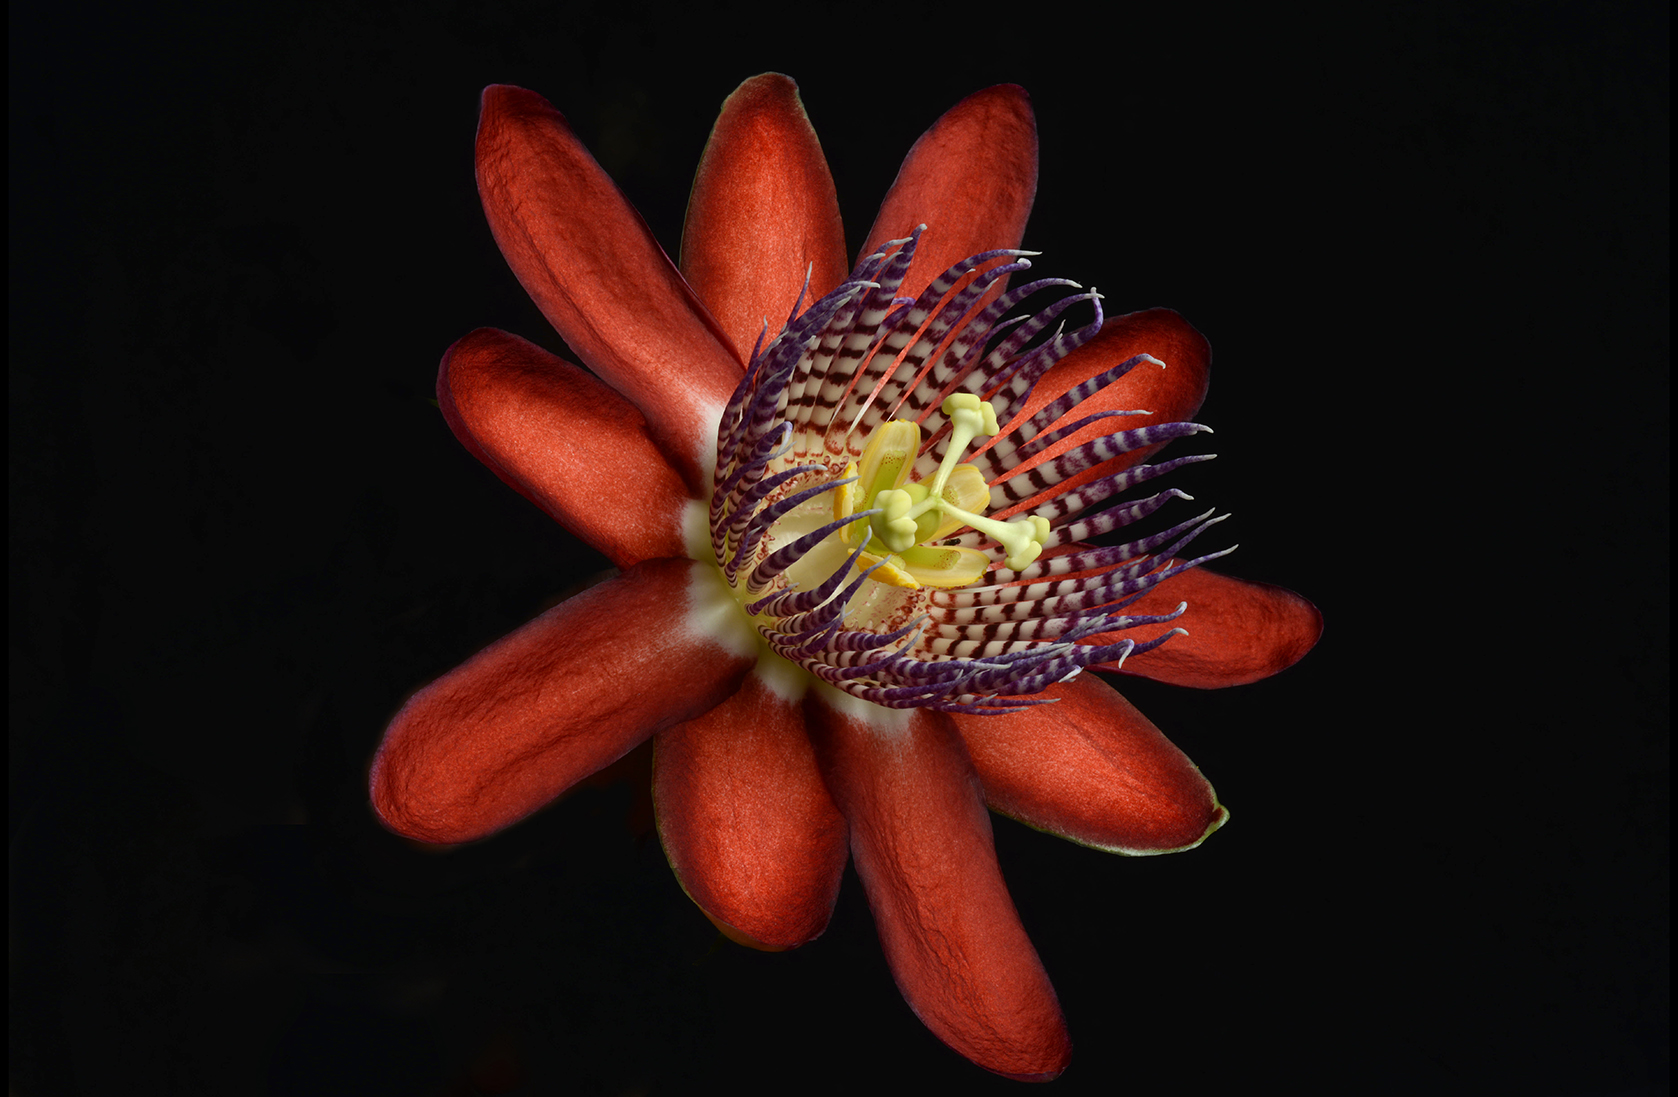  Ruby-glow passionflower 